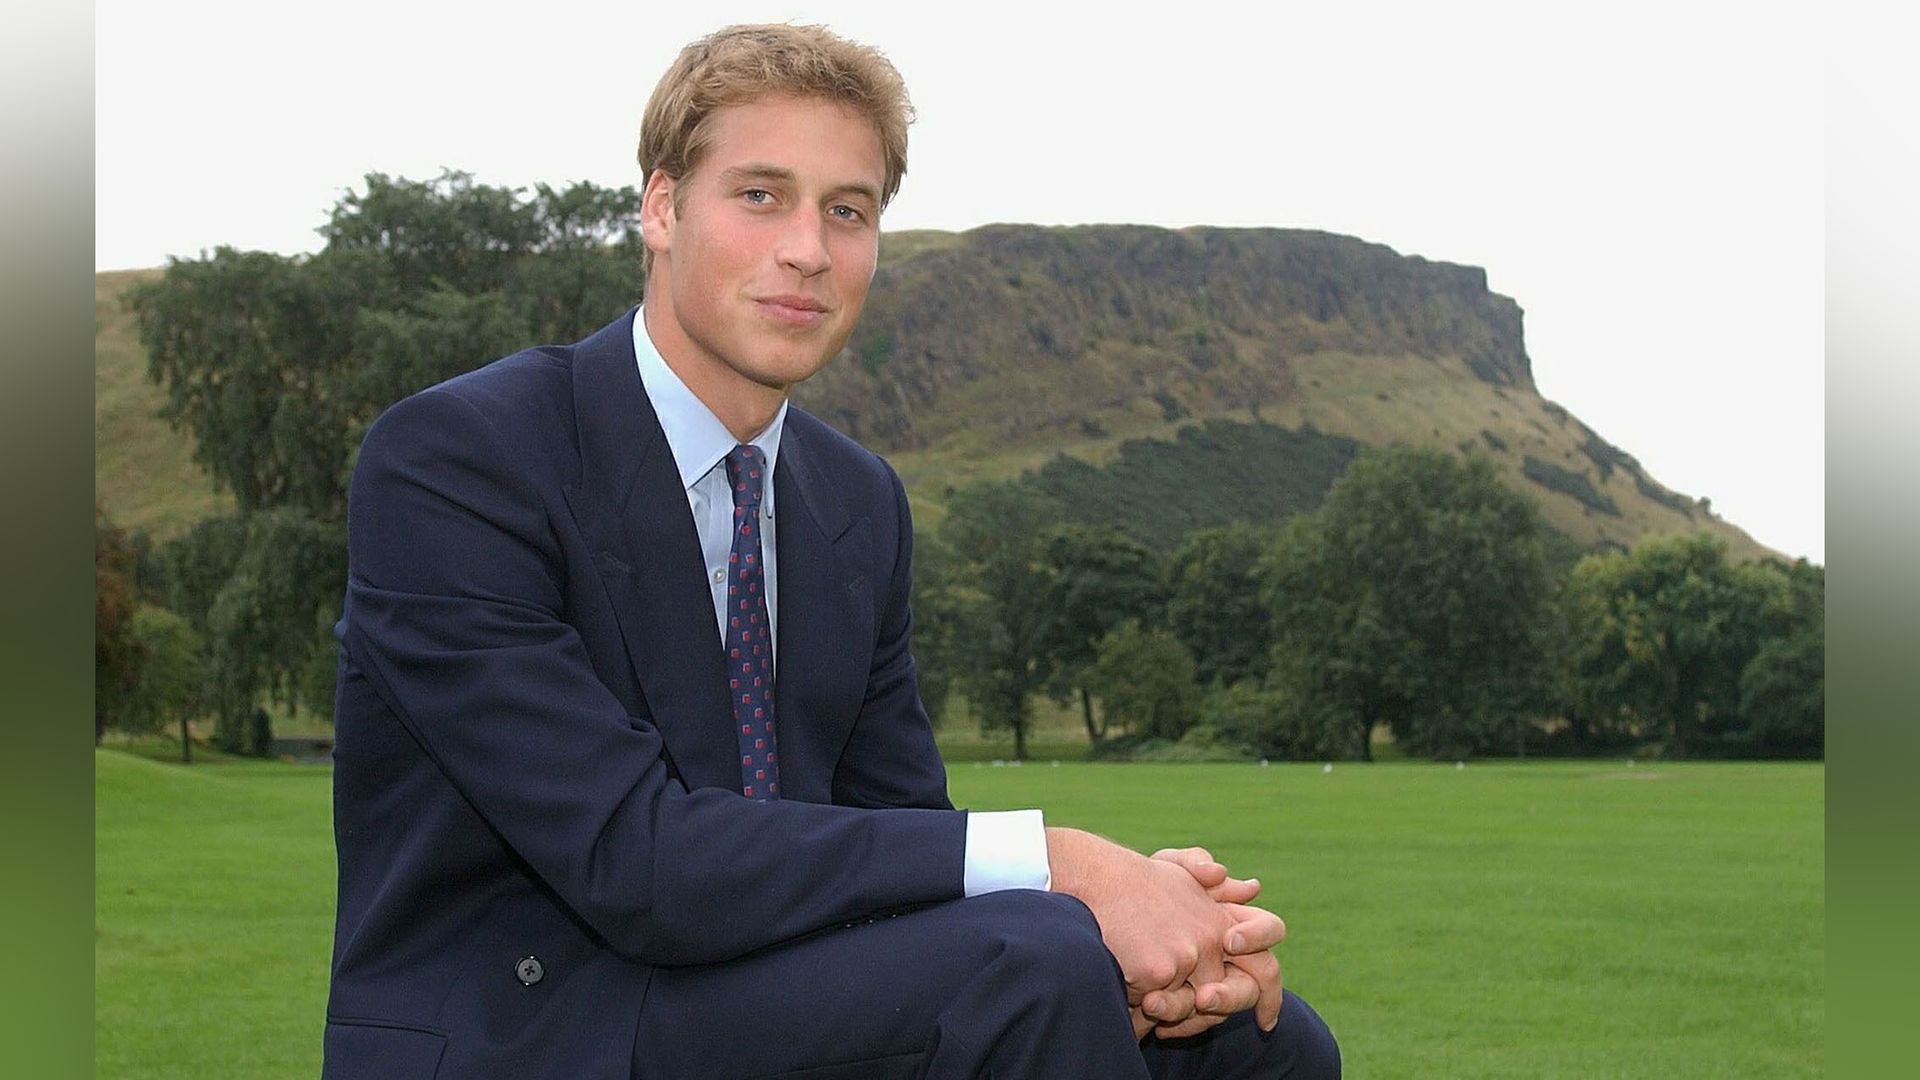 Prince William in his youth